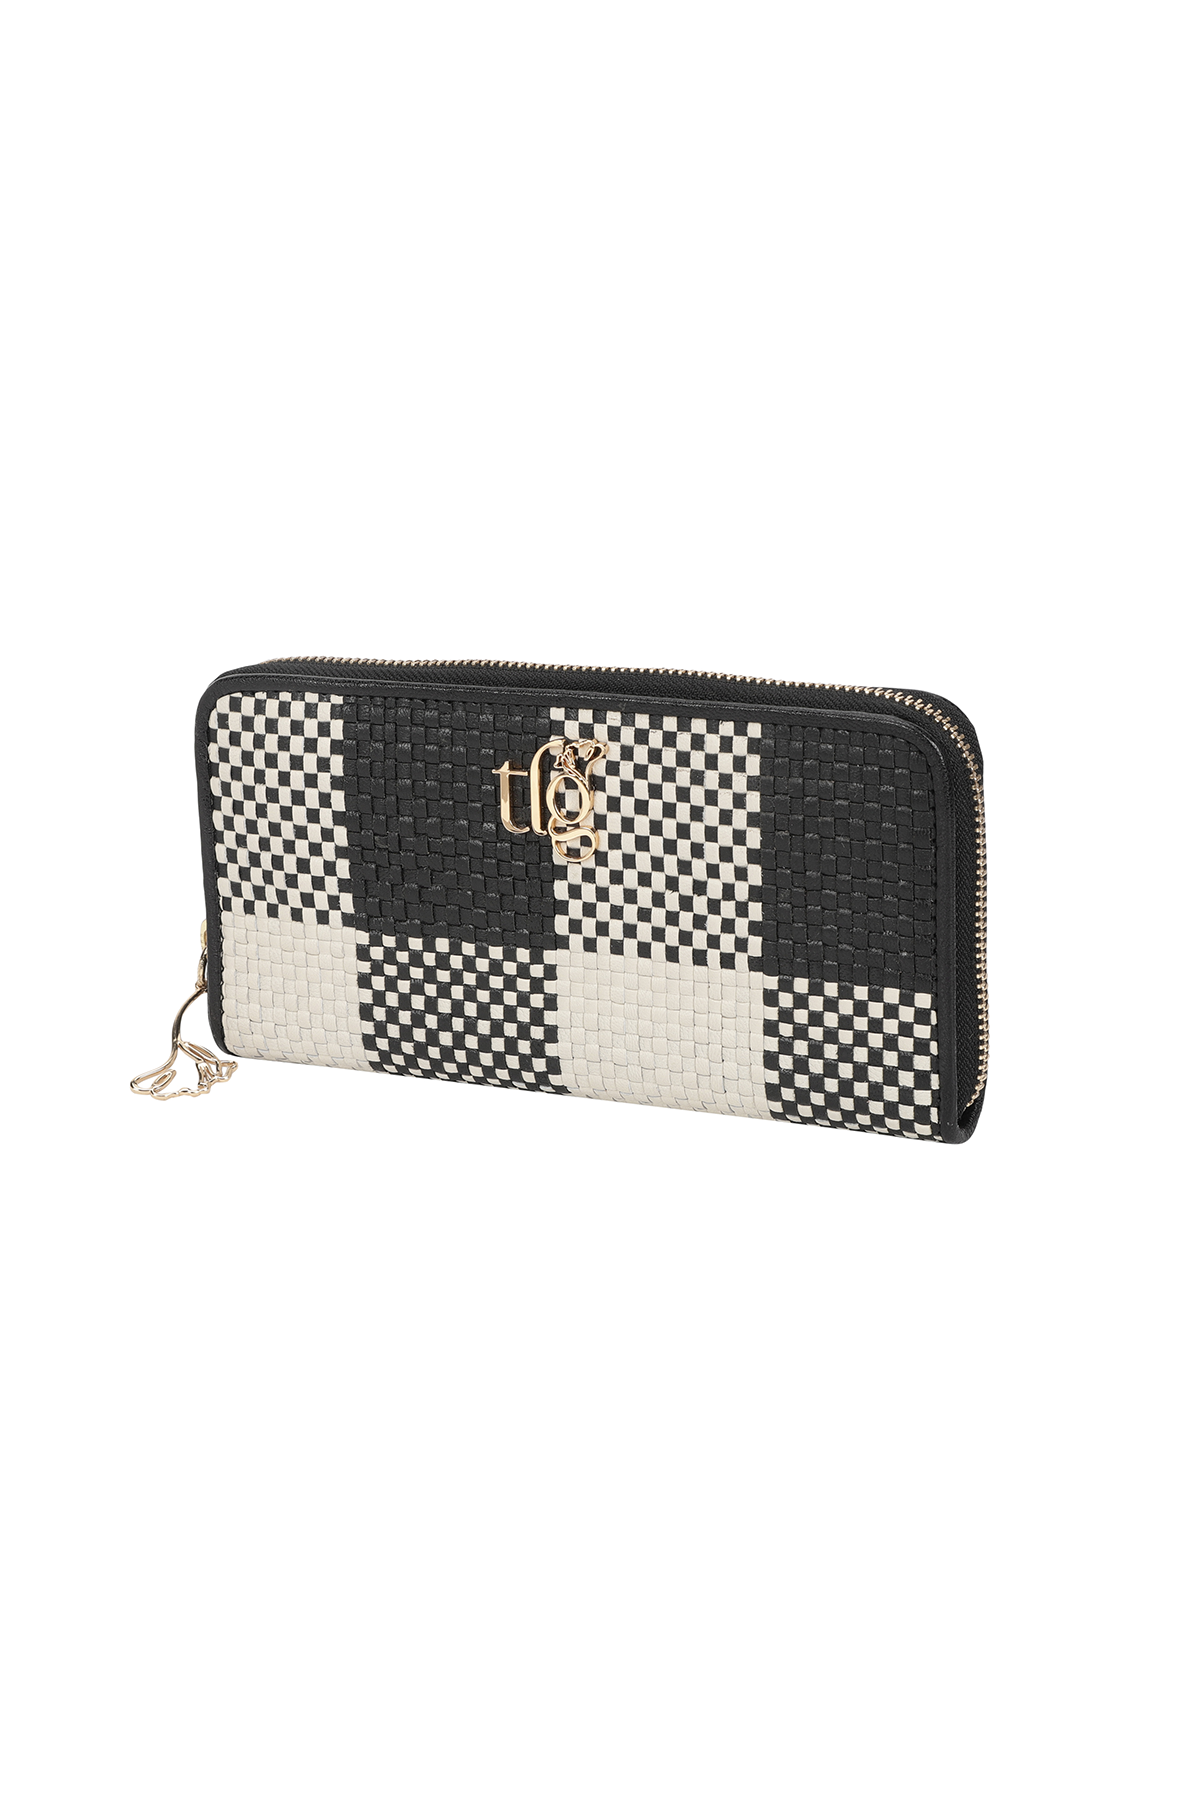 Rio Woven Leather Wallet